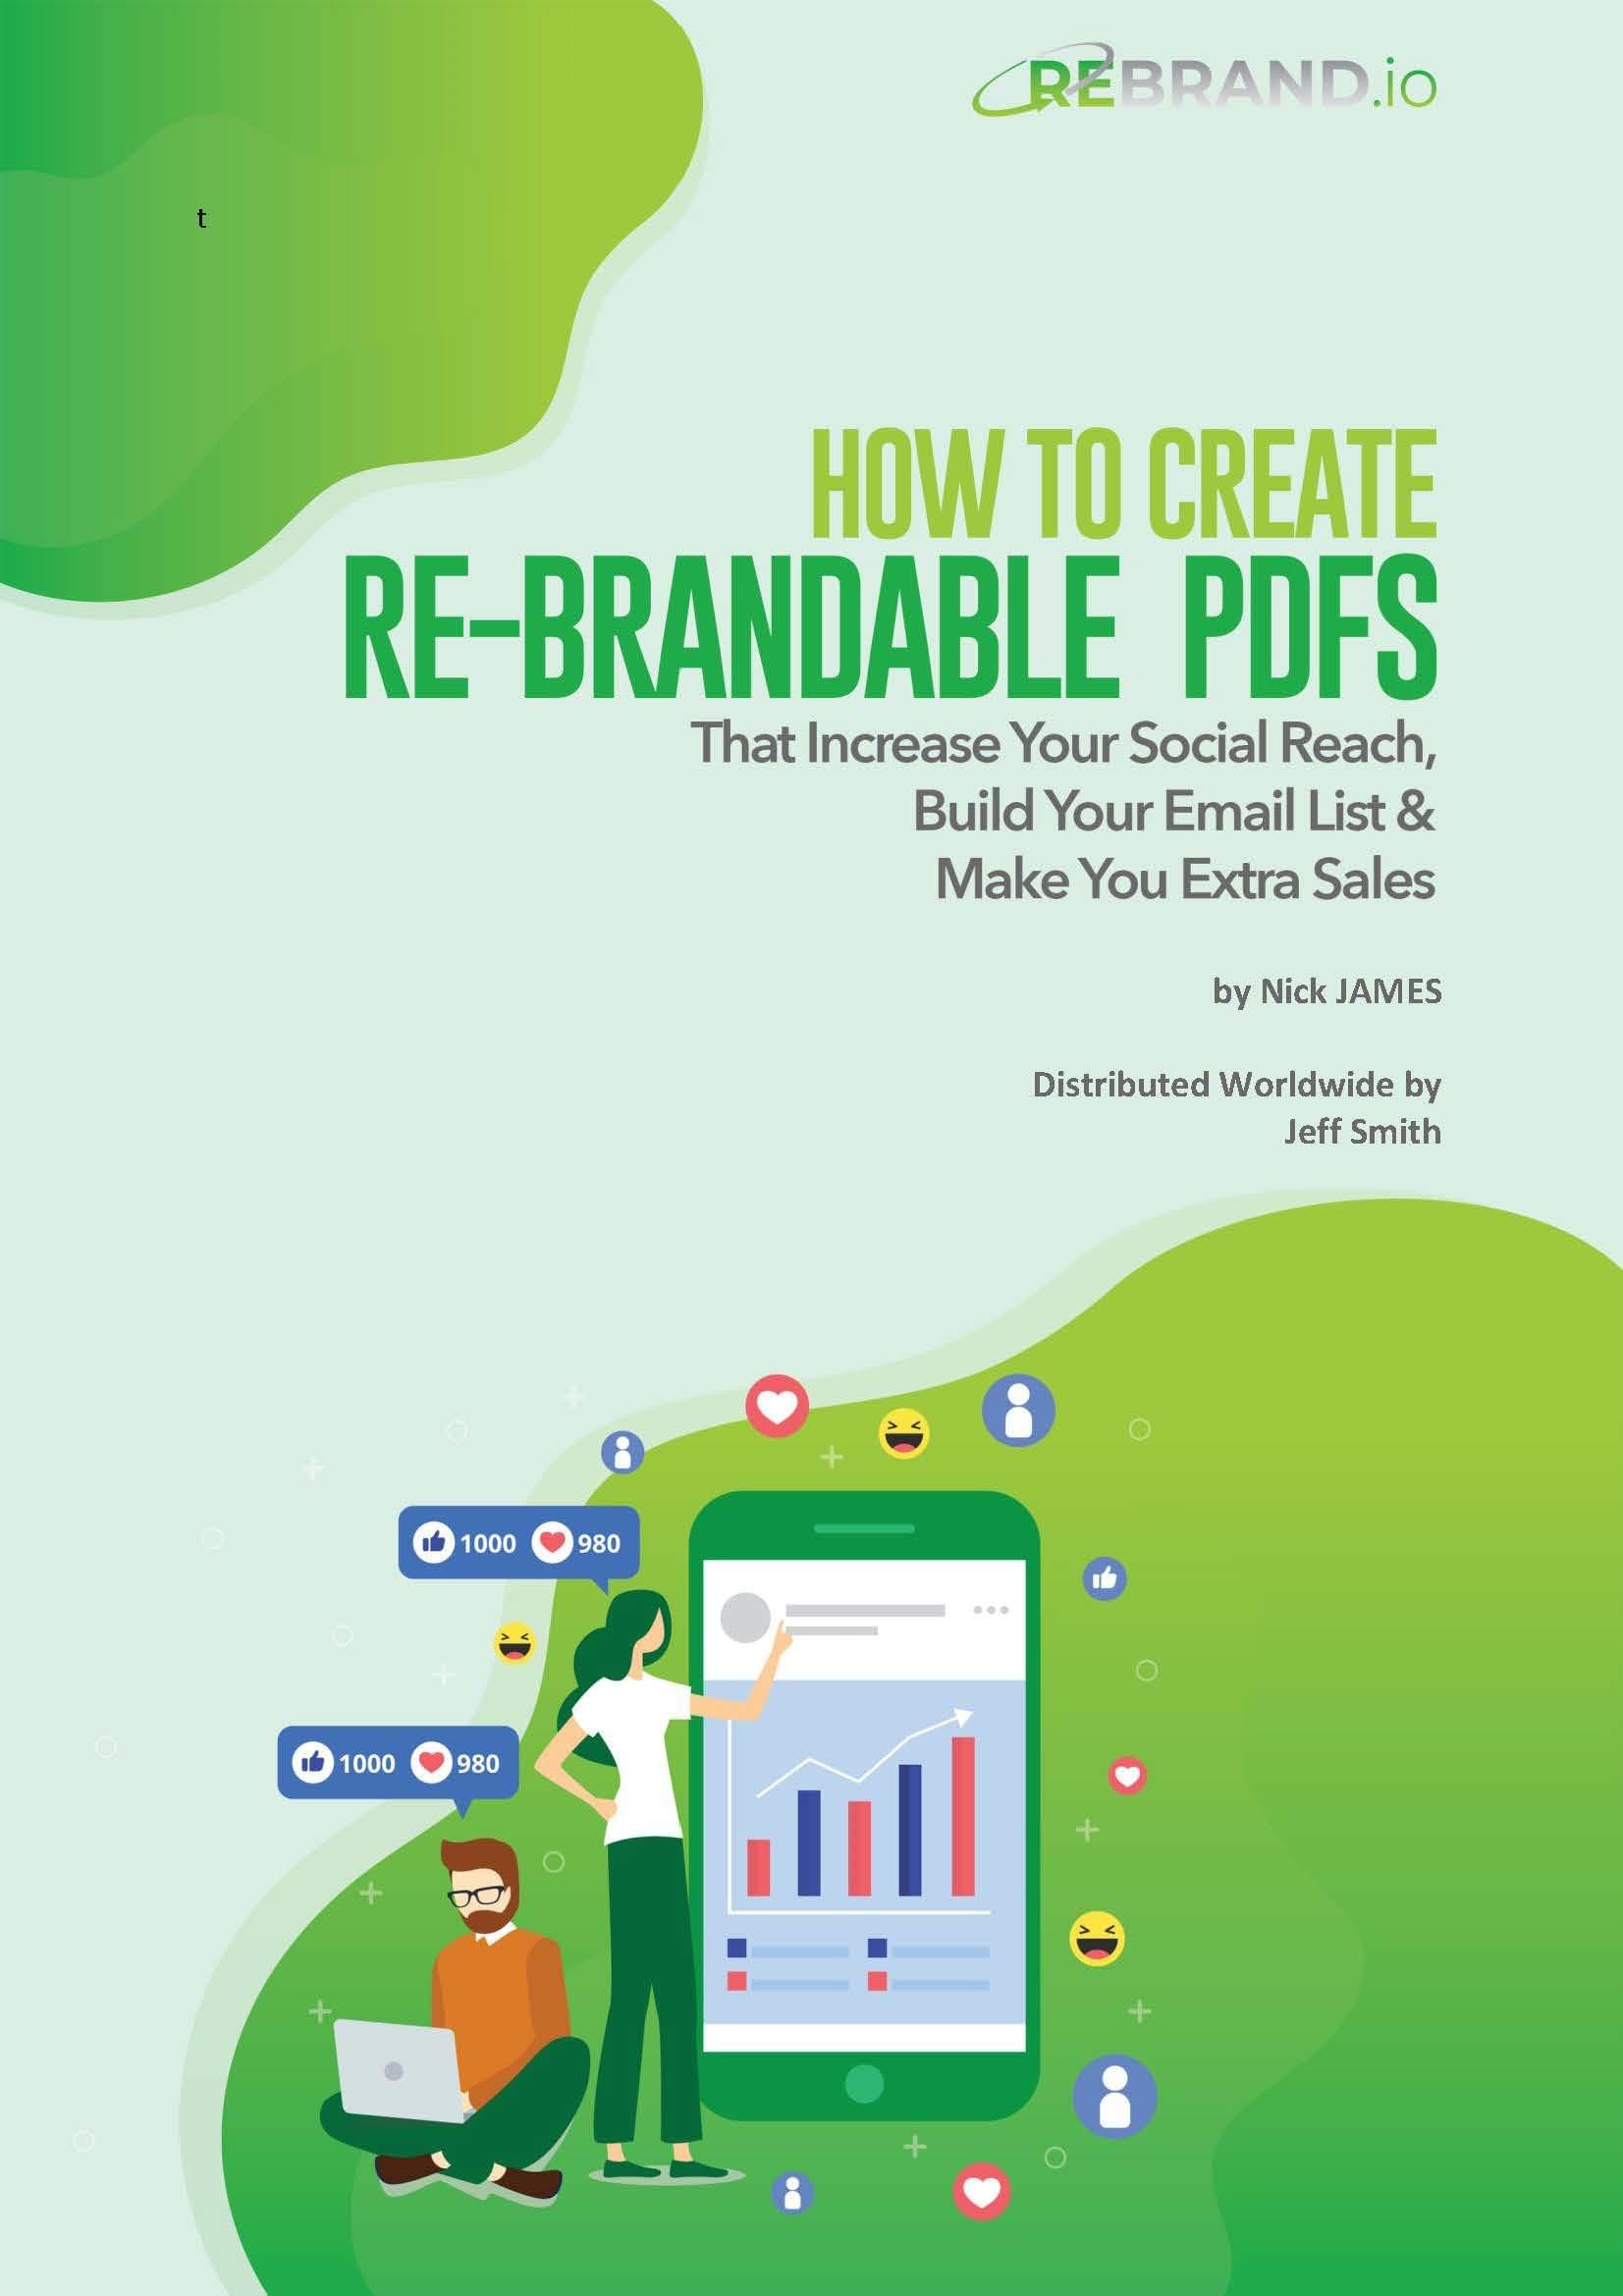 How To Create Re-Brandable PDFs